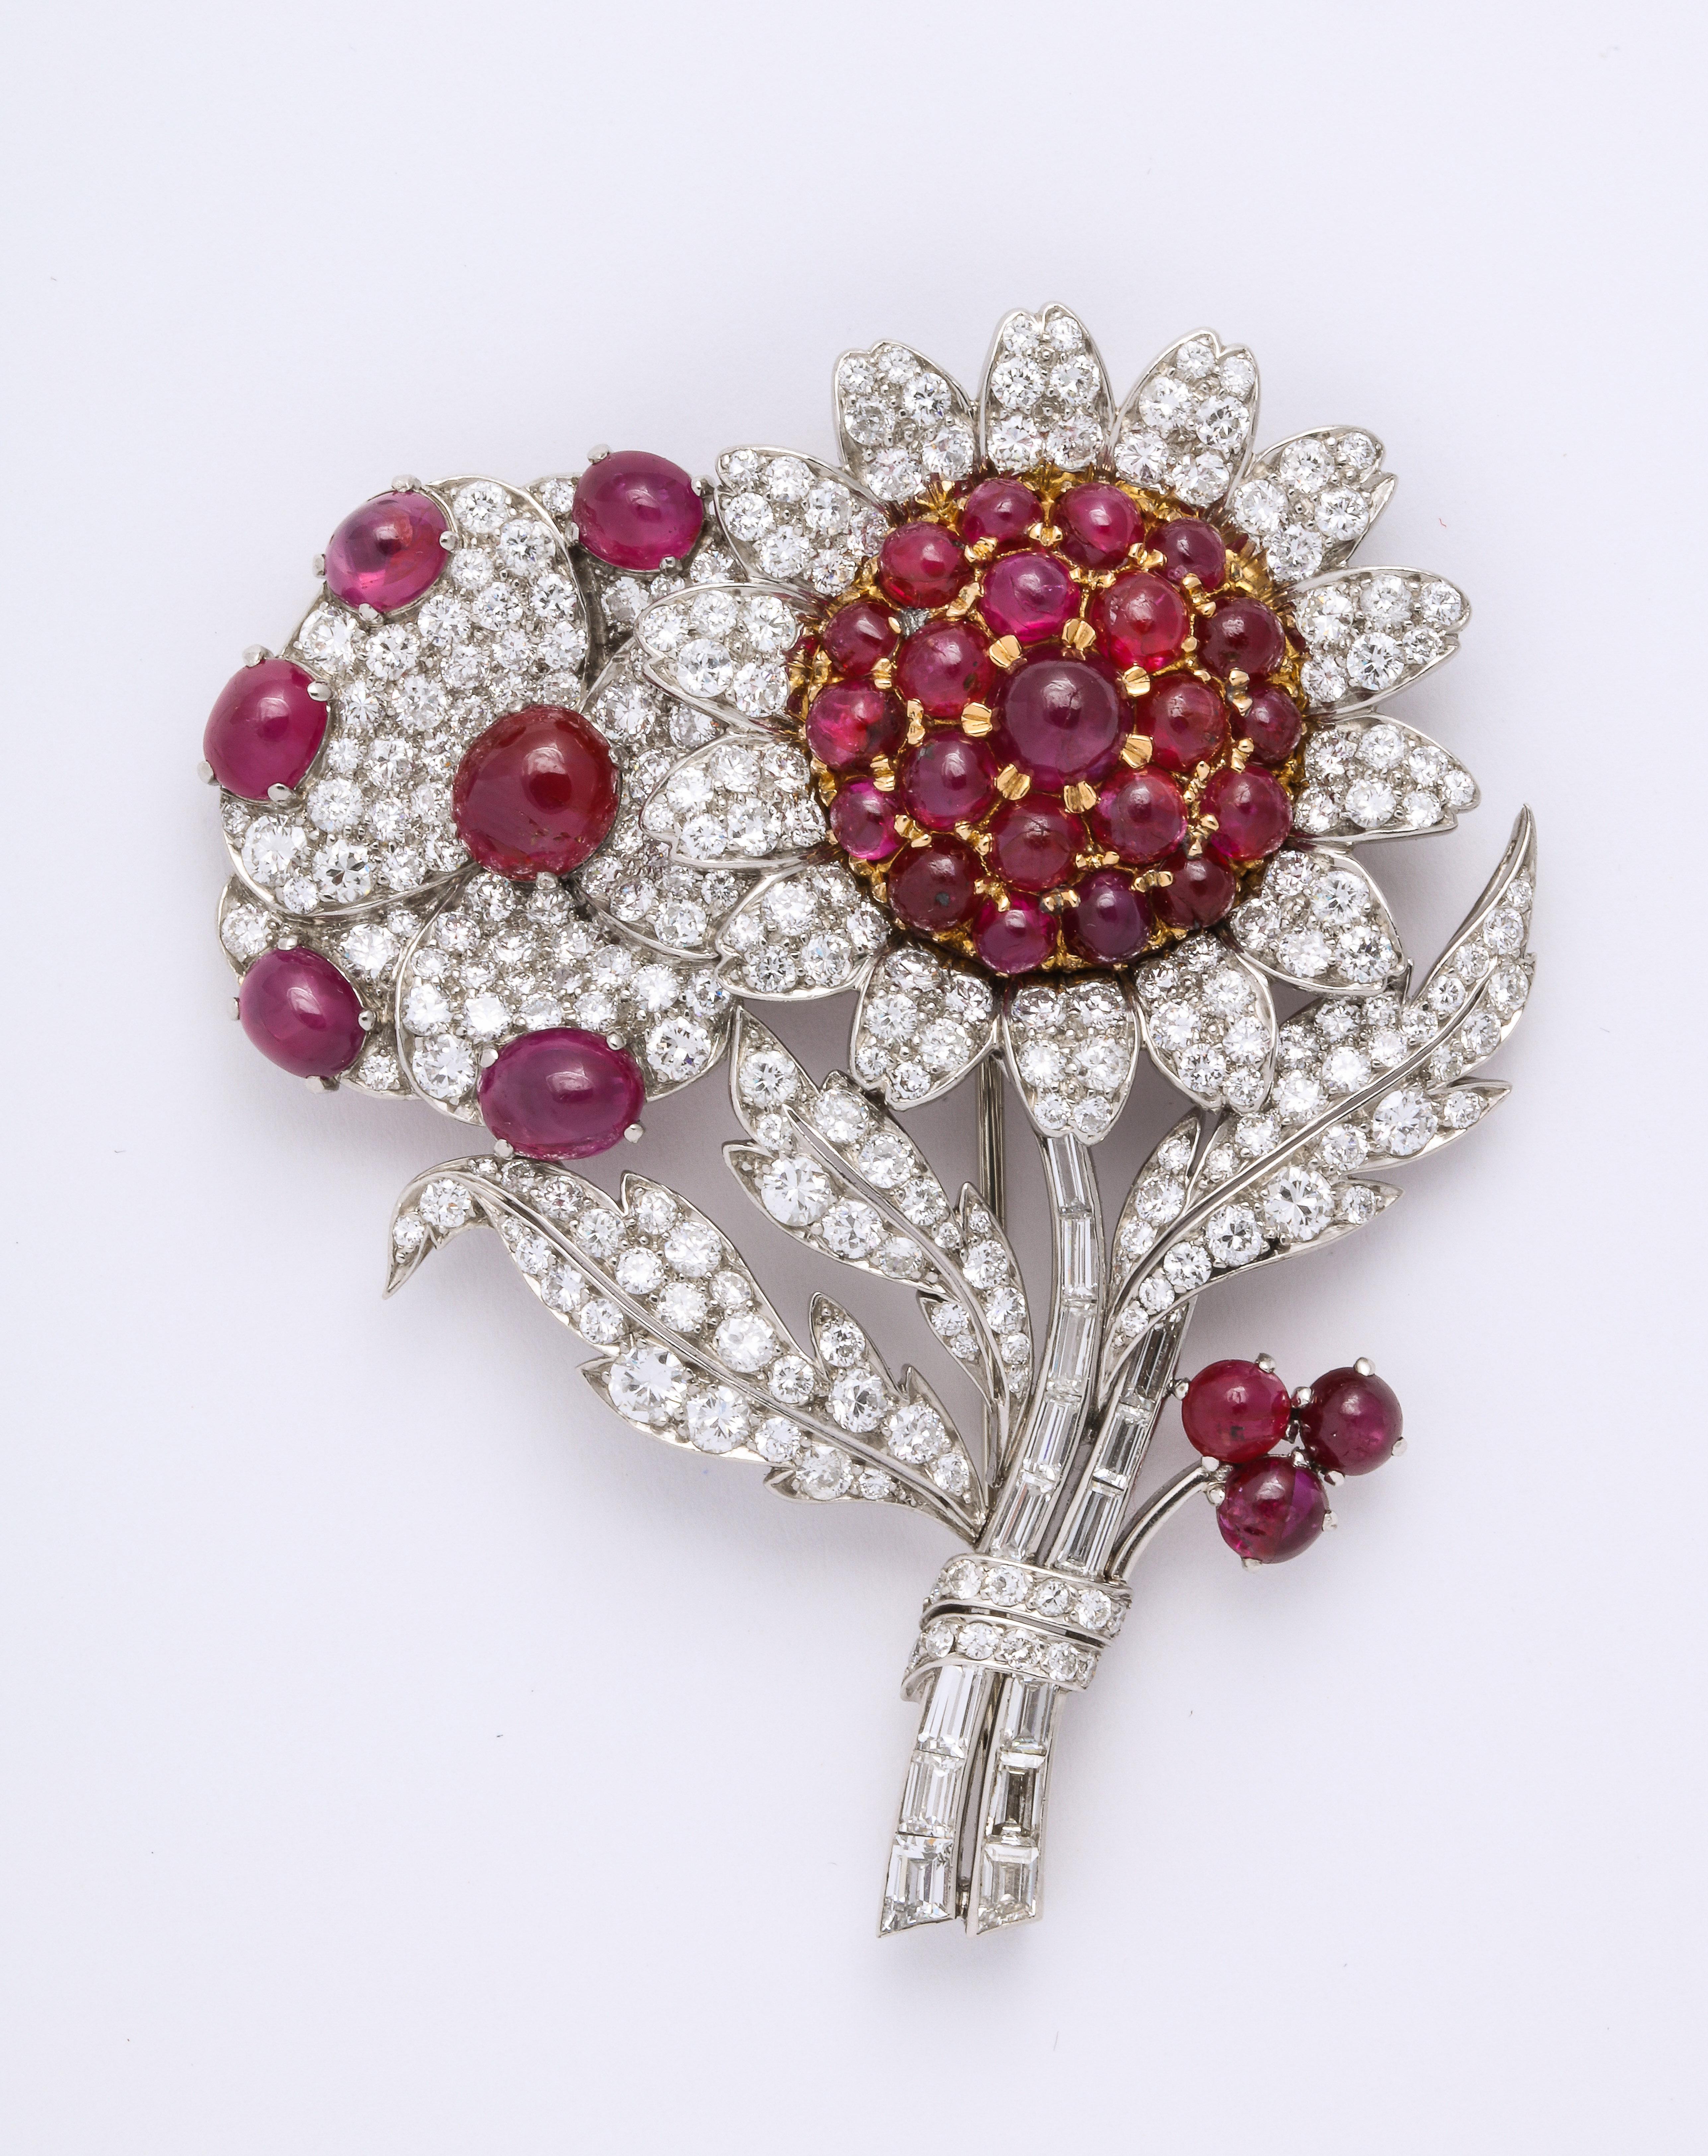 How chic is this?! The house of Bulgari remains one of today's hottest collectible names in high end jewelry.  This brooch, made in Italy in 1937, uses cabochon rubies of the reddest red and lively white diamonds in a flower design that's bold and